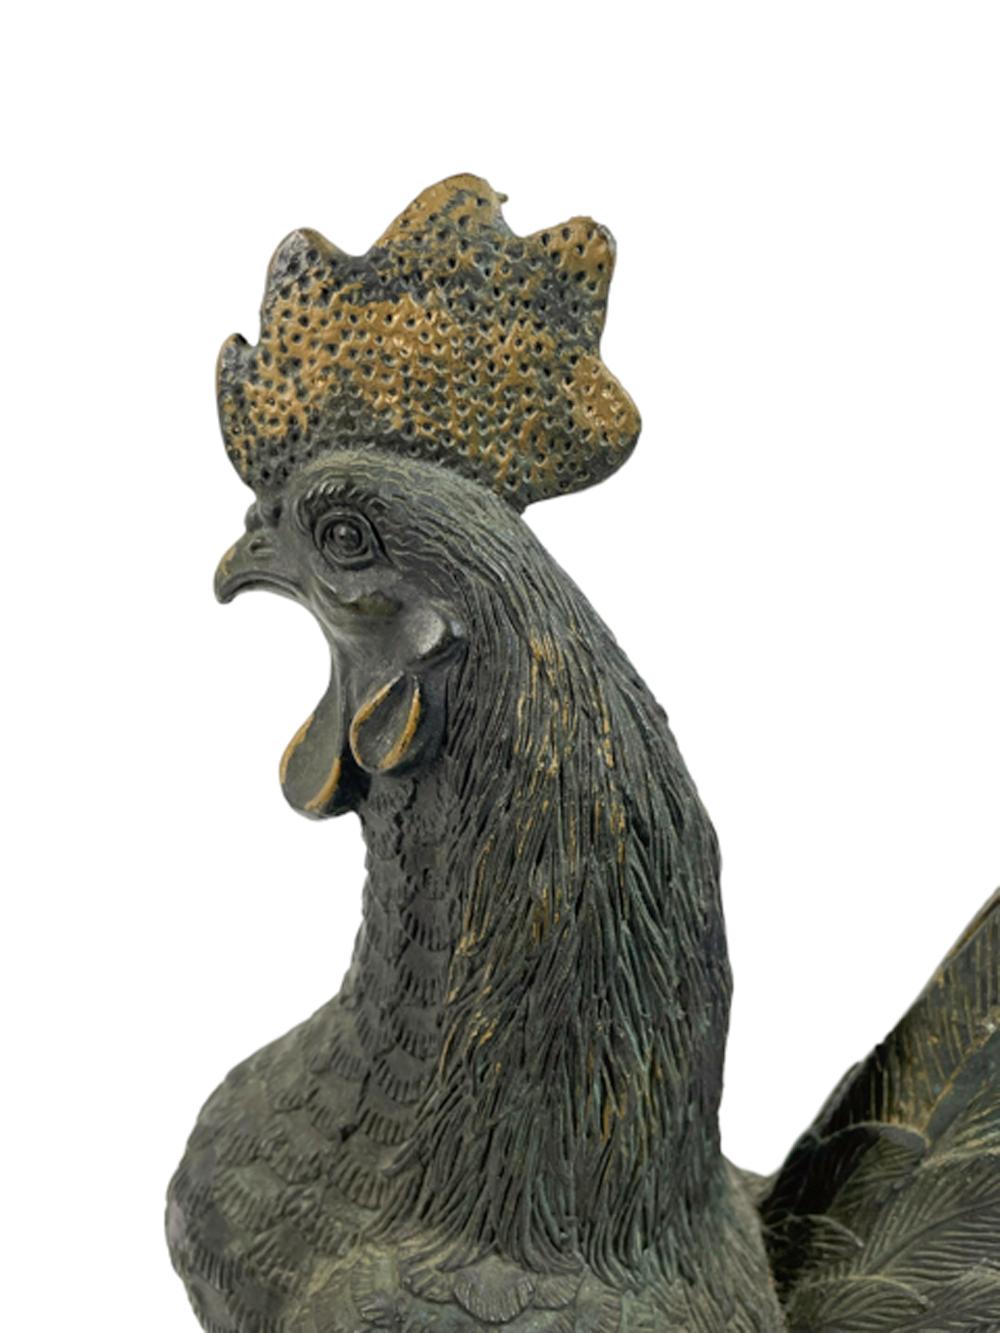 Early 20th century cast bronze figure of a rooster with good patina and traces of original gilding. Cast with nicely detailed feathers and in an alert posture. 